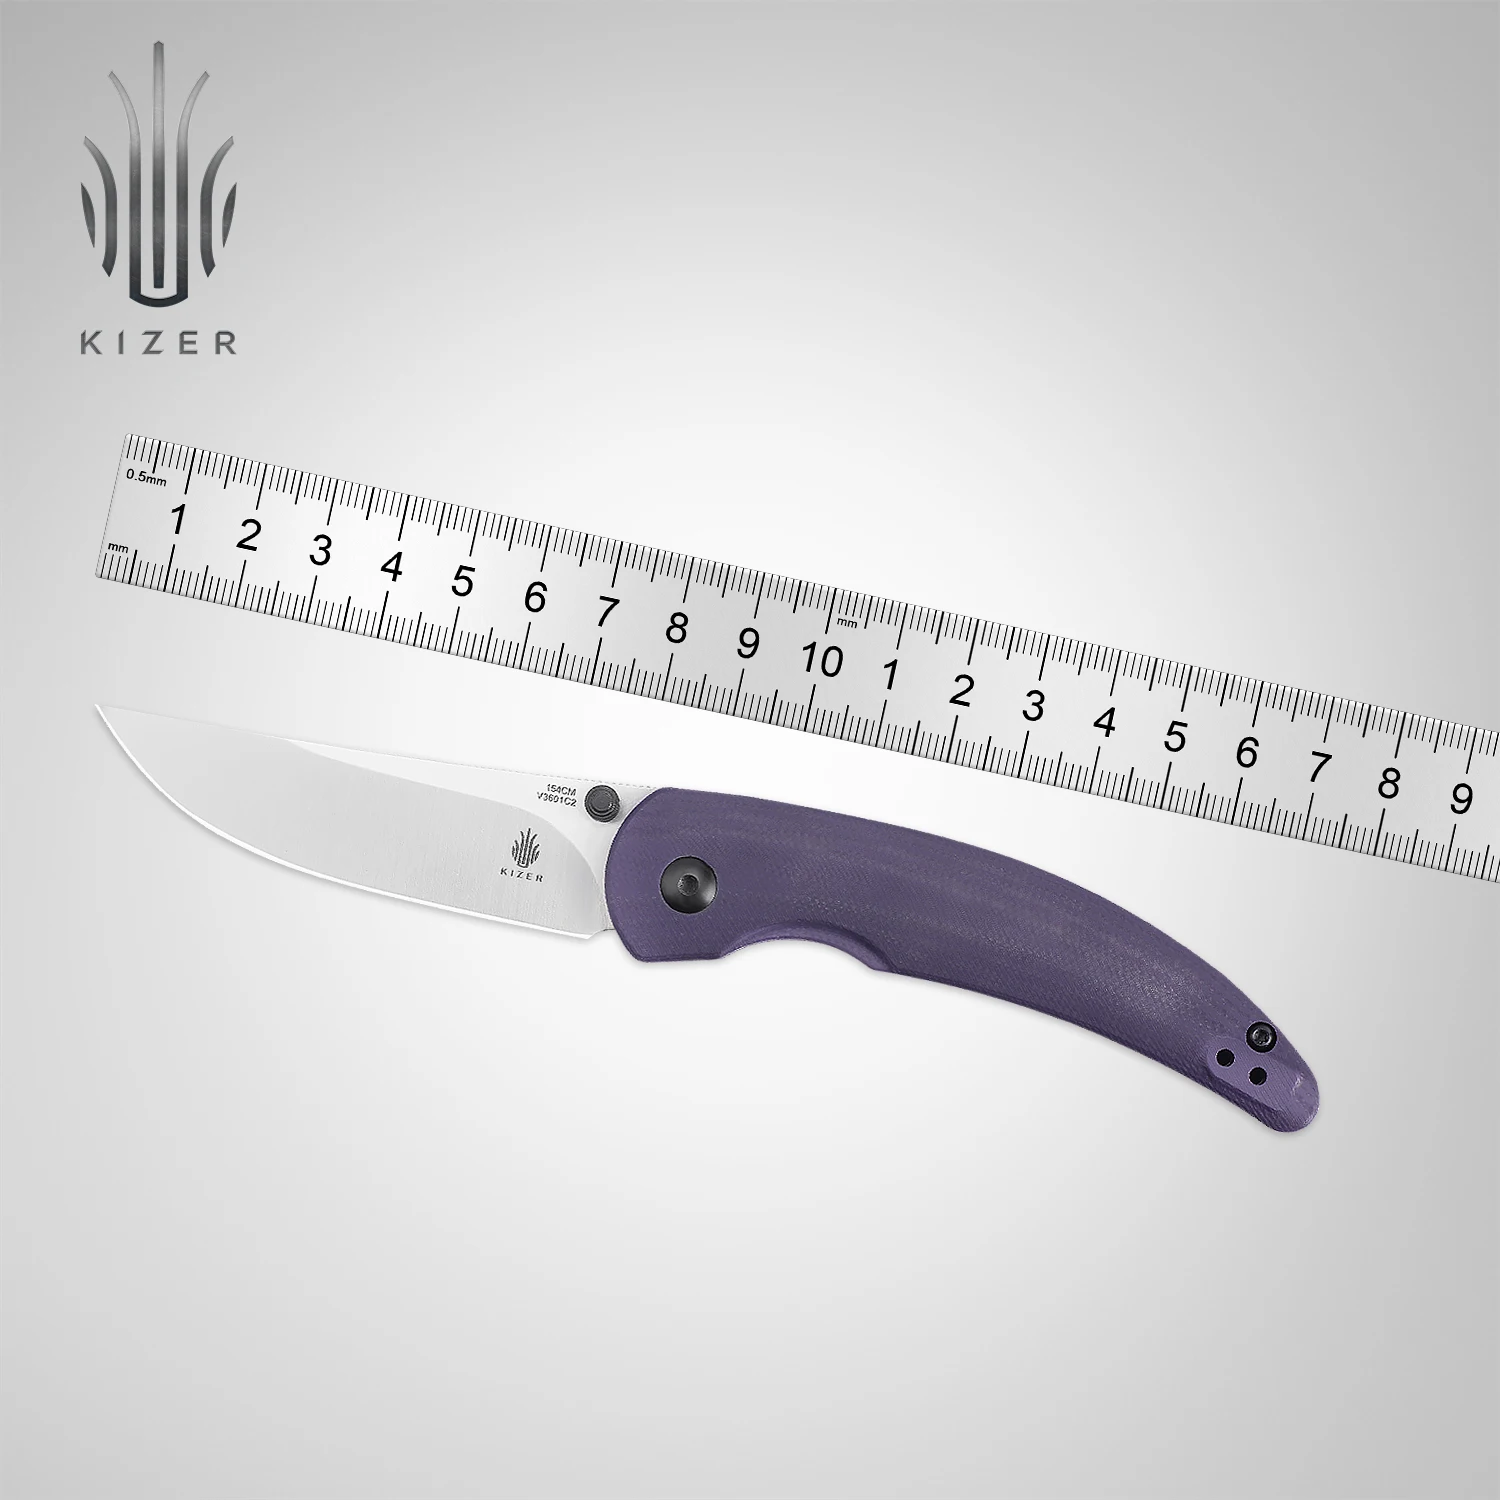 Kizer Knife Pocket V3601C2 Chili Pepper 2022 New Survival Knife with 154CM Steel Blade High Quality Outdoor EDC Tools